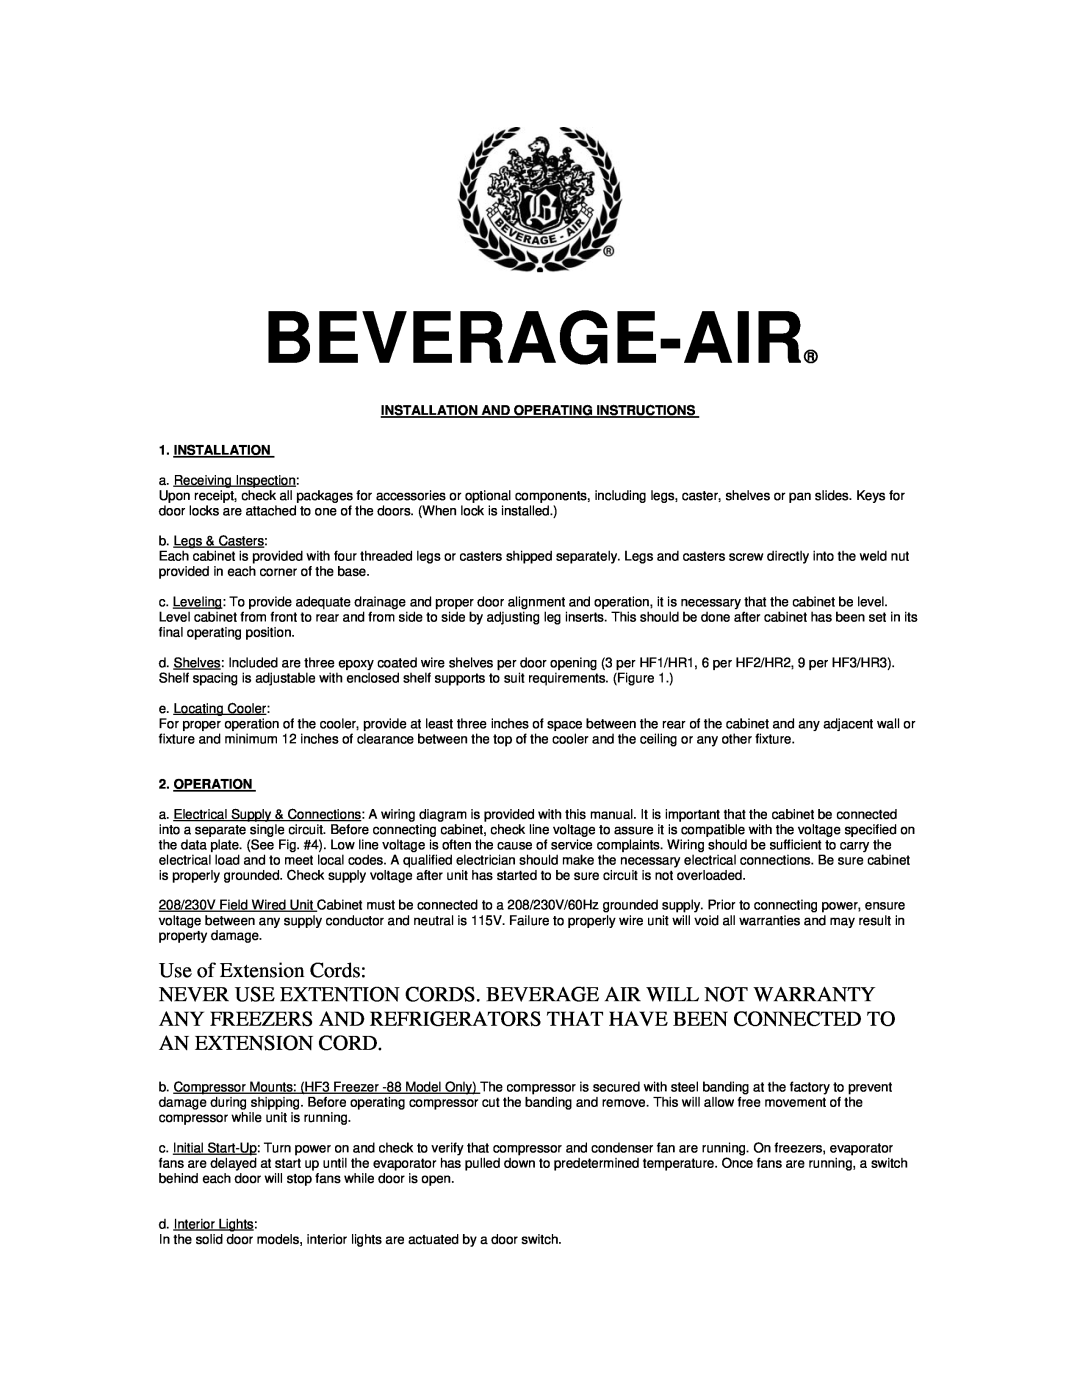 Beverage-Air Refrigerator manual Use of Extension Cords, Beverage-Air, Installation And Operating Instructions, Operation 